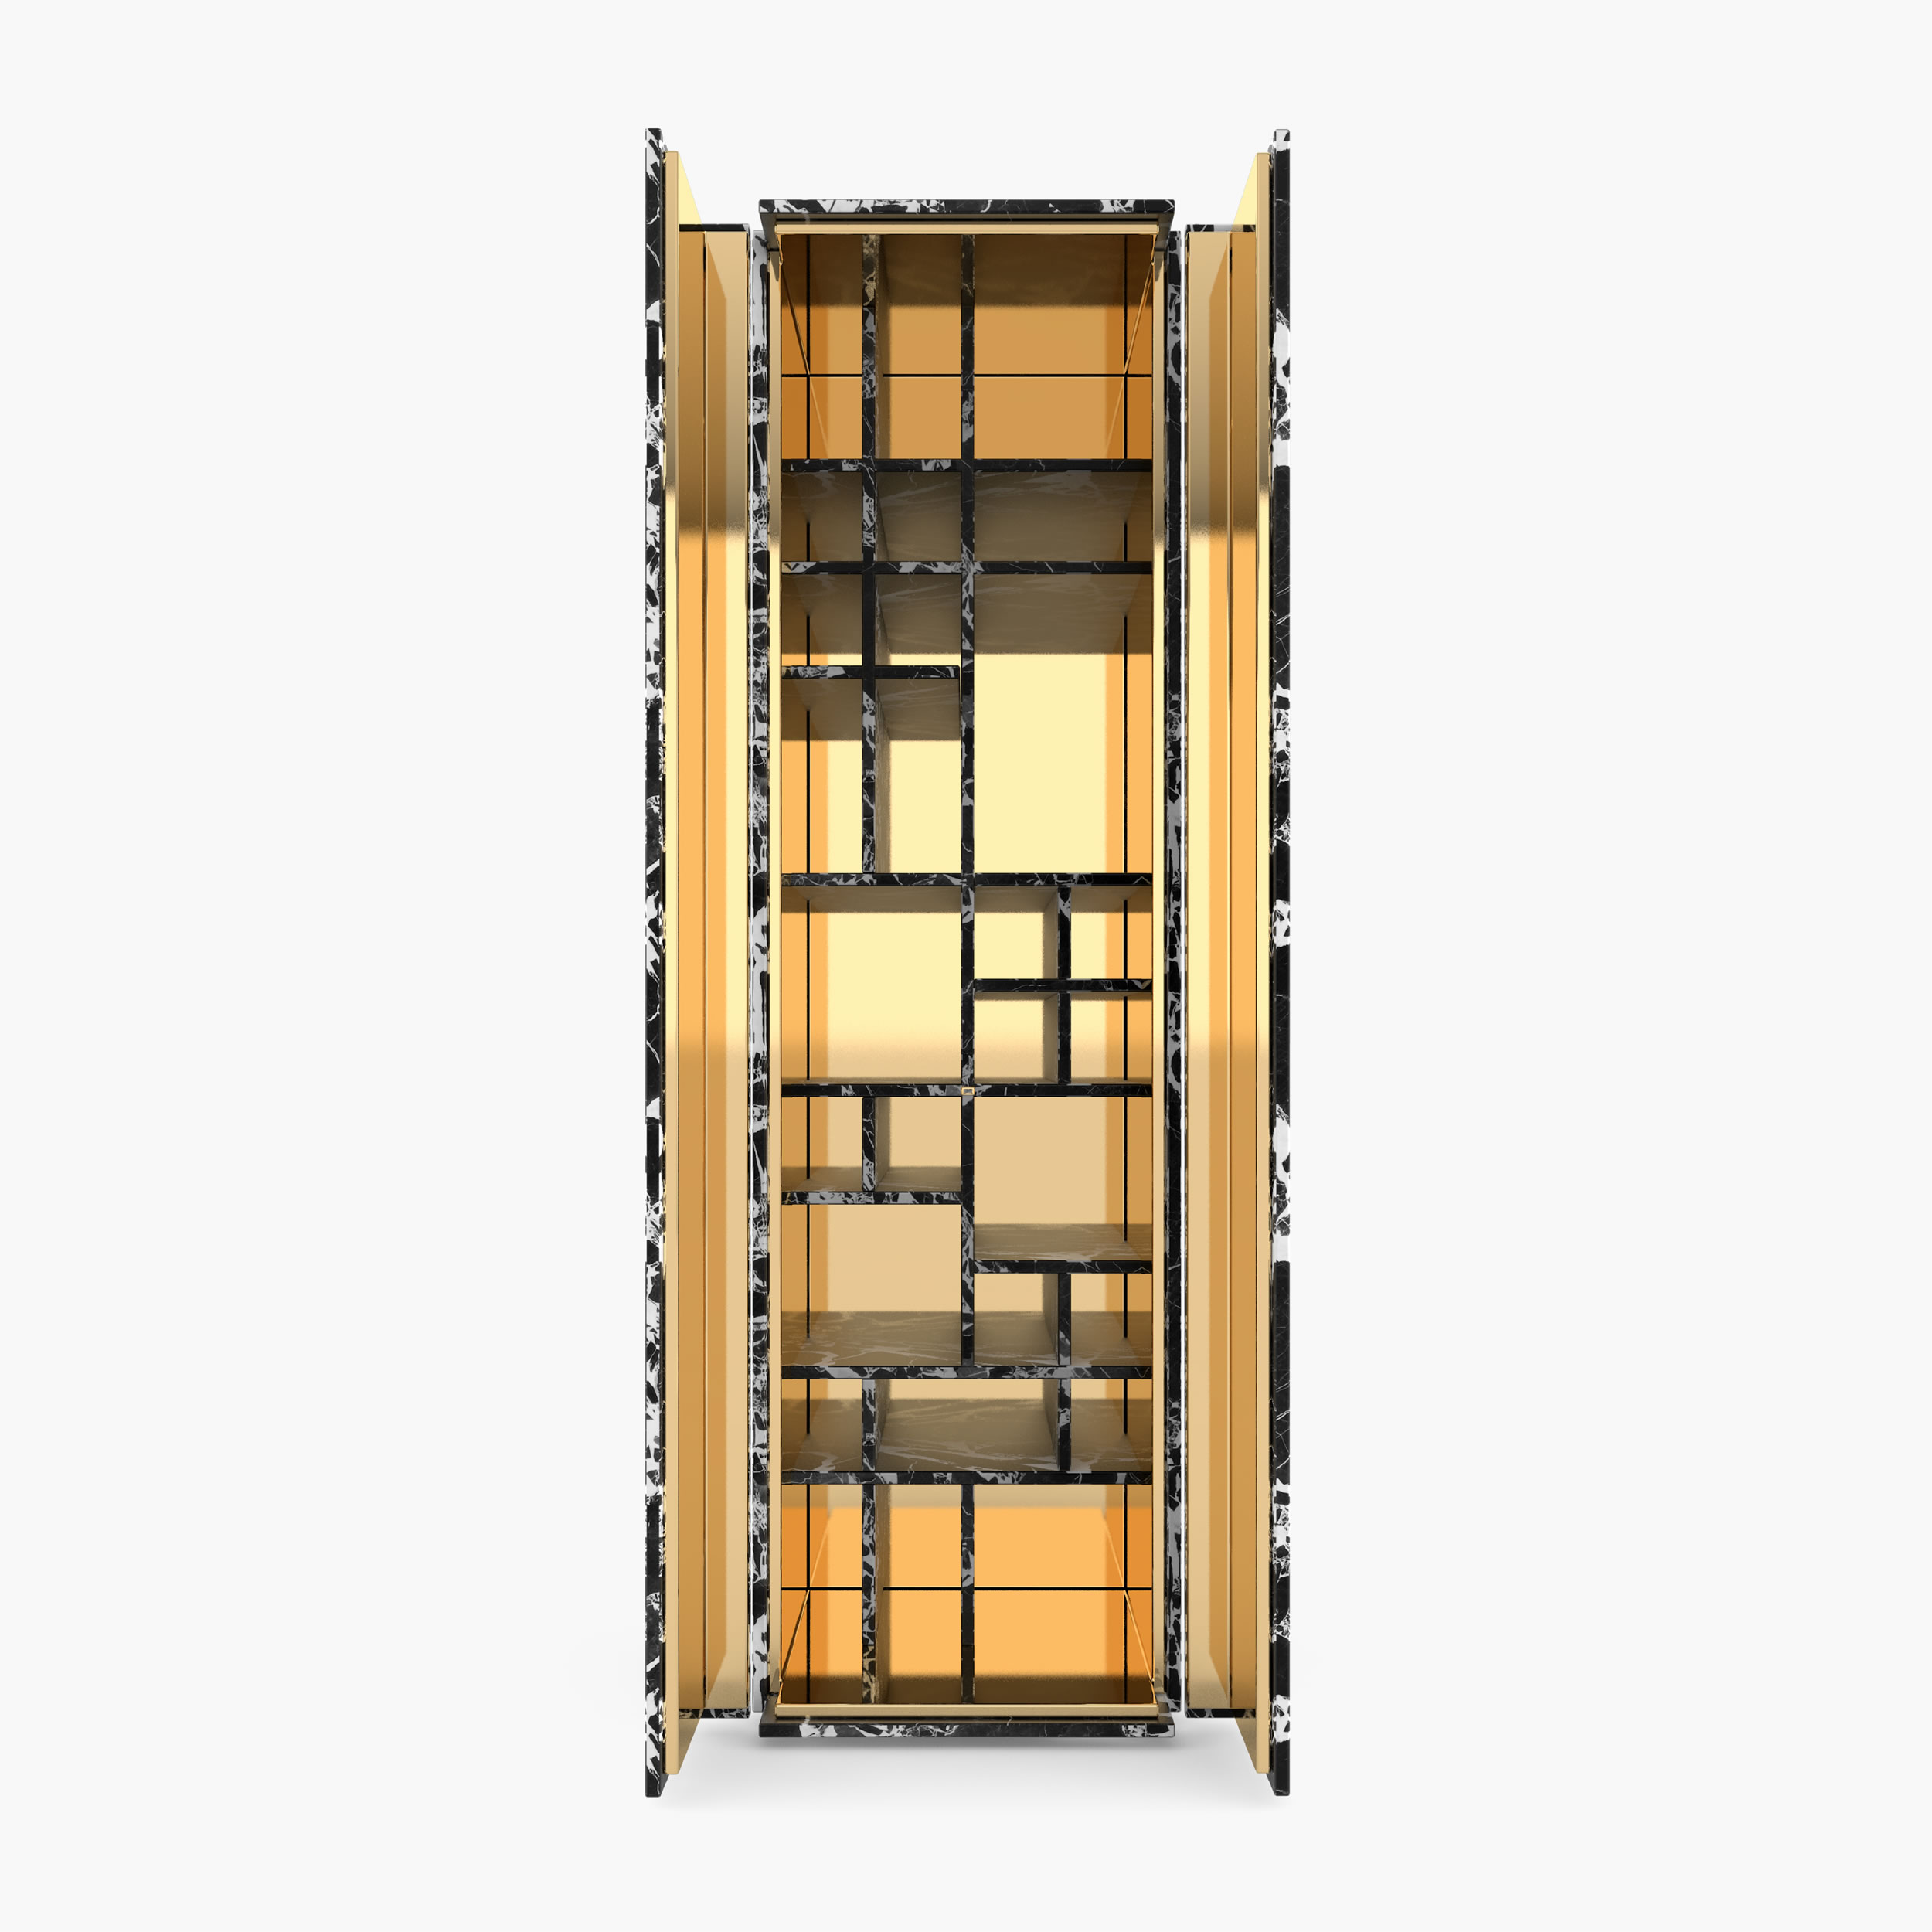 Cabinet of cuboids White Grand Antique Marble collectible Living Room designs Cabinets FS 146 B FELIX SCHWAKE